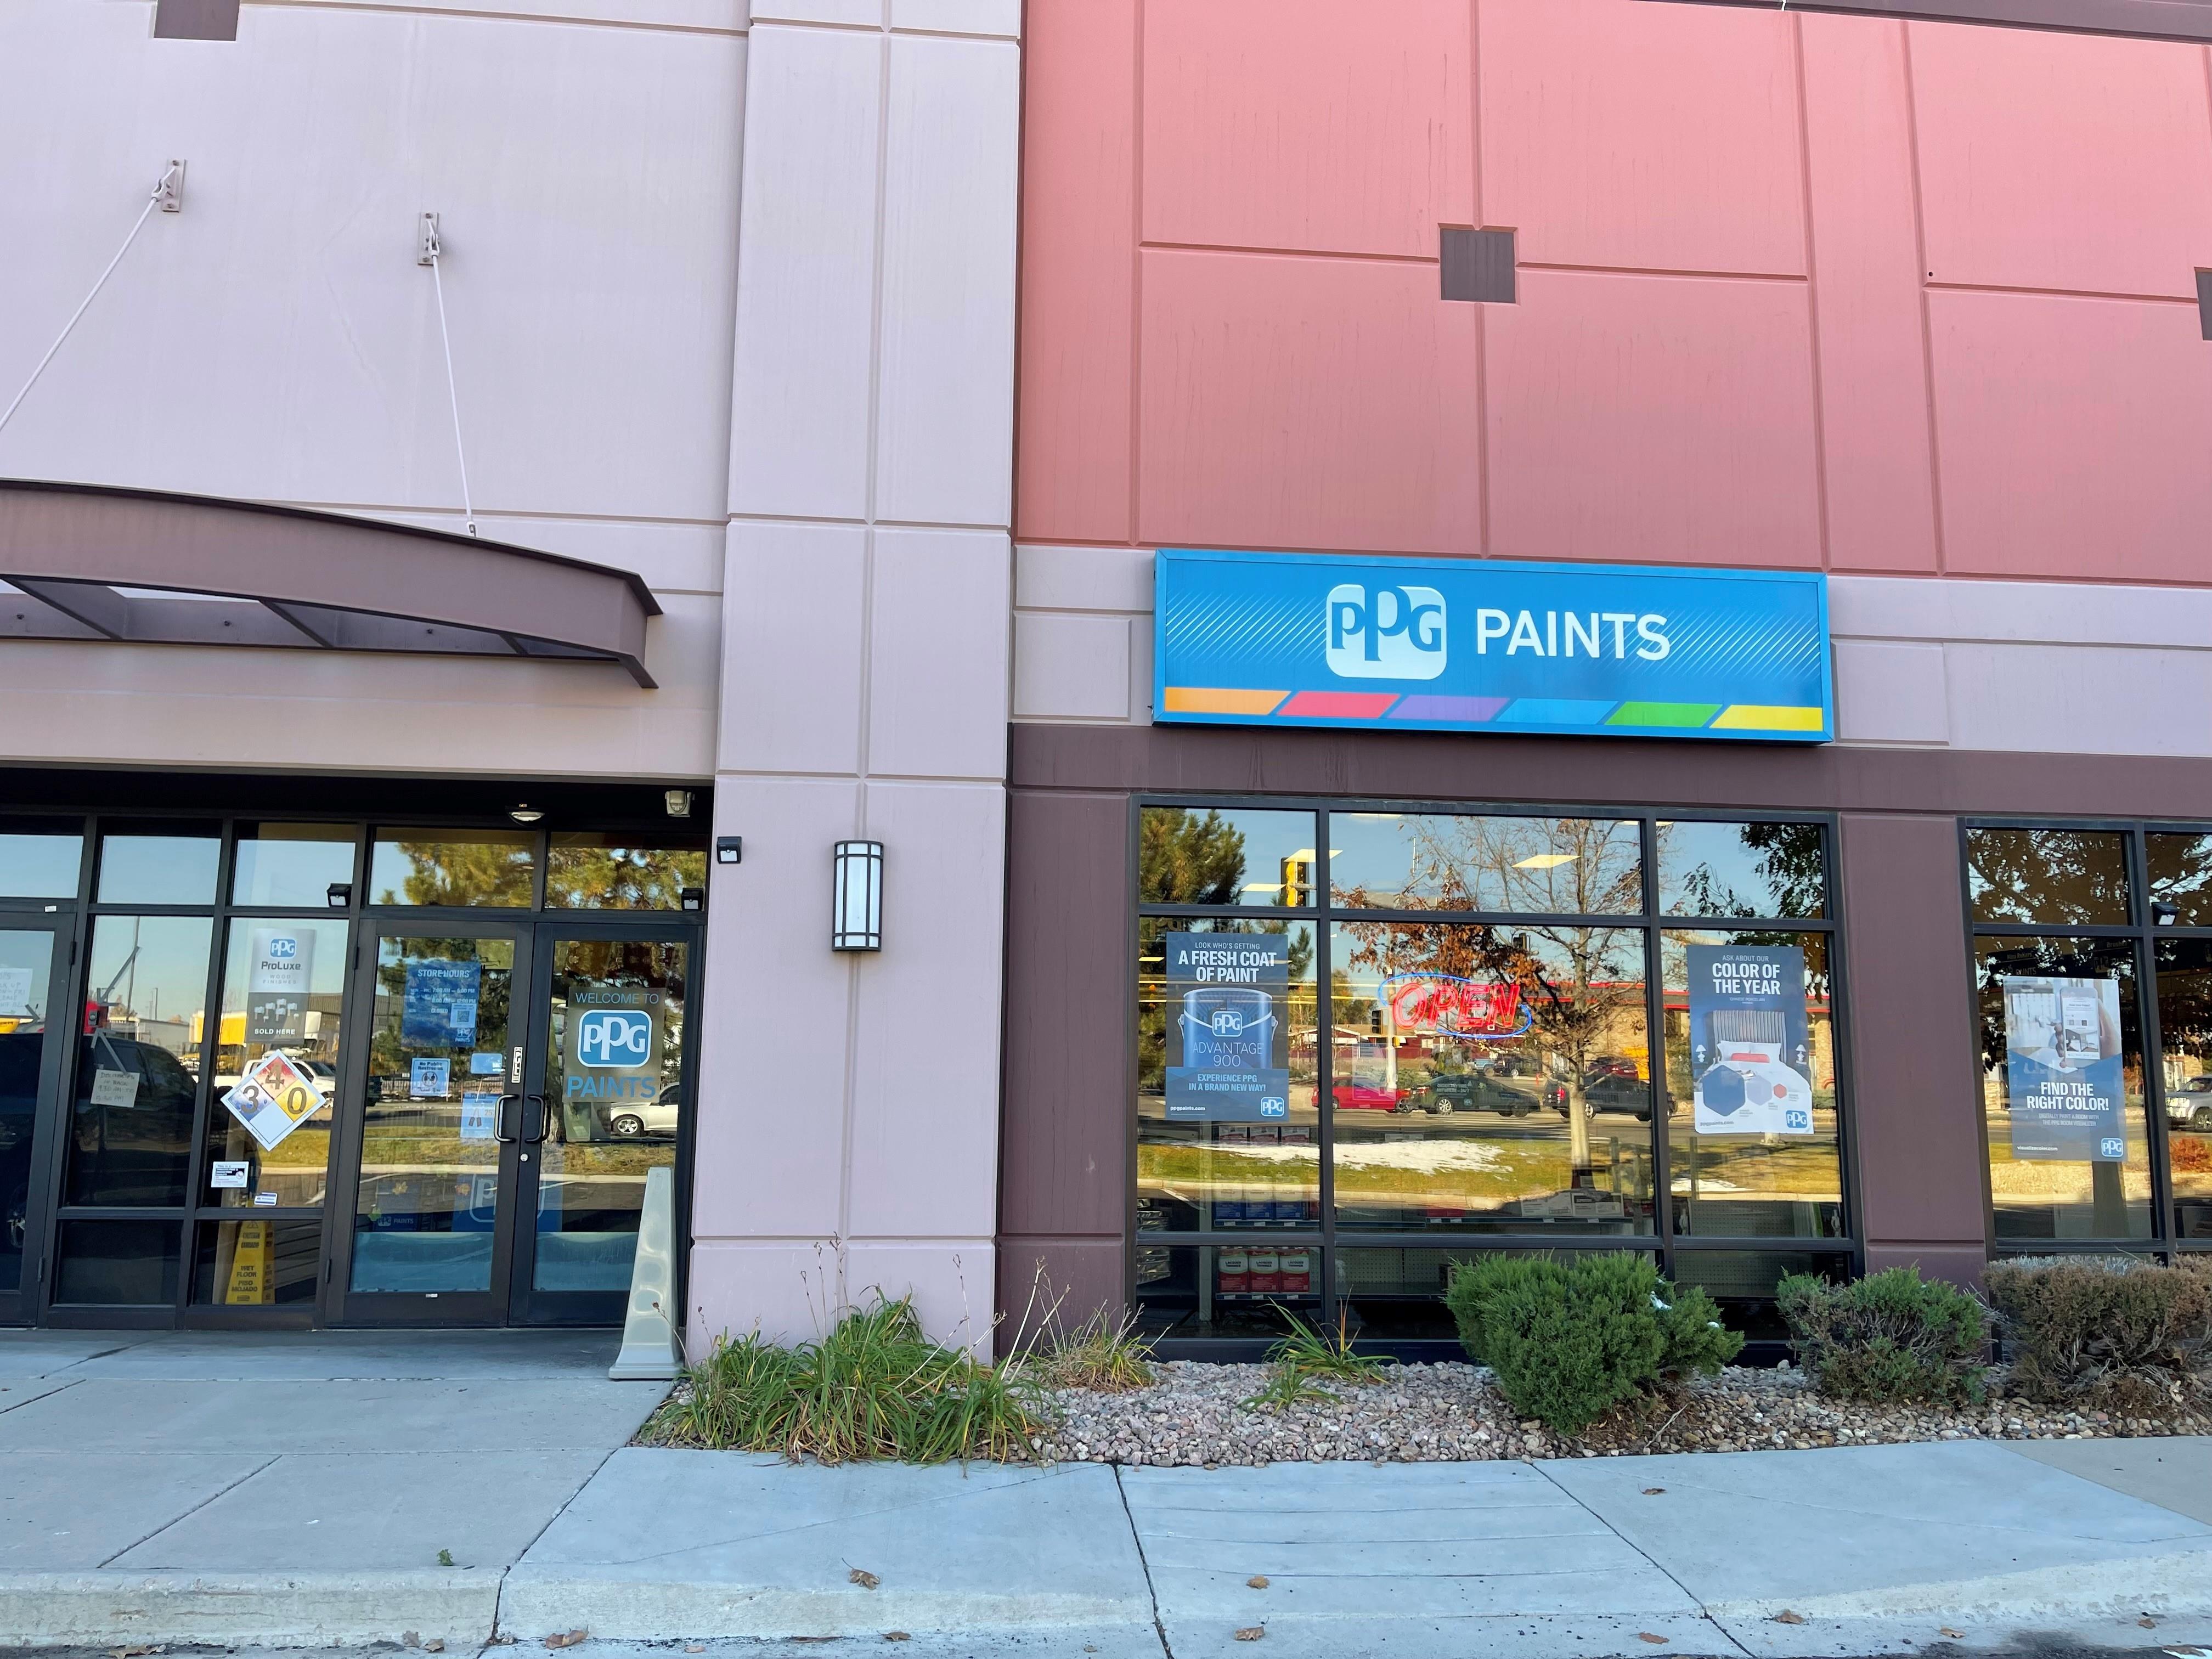 Paint Store Near Me? - We Have A Location Close By!